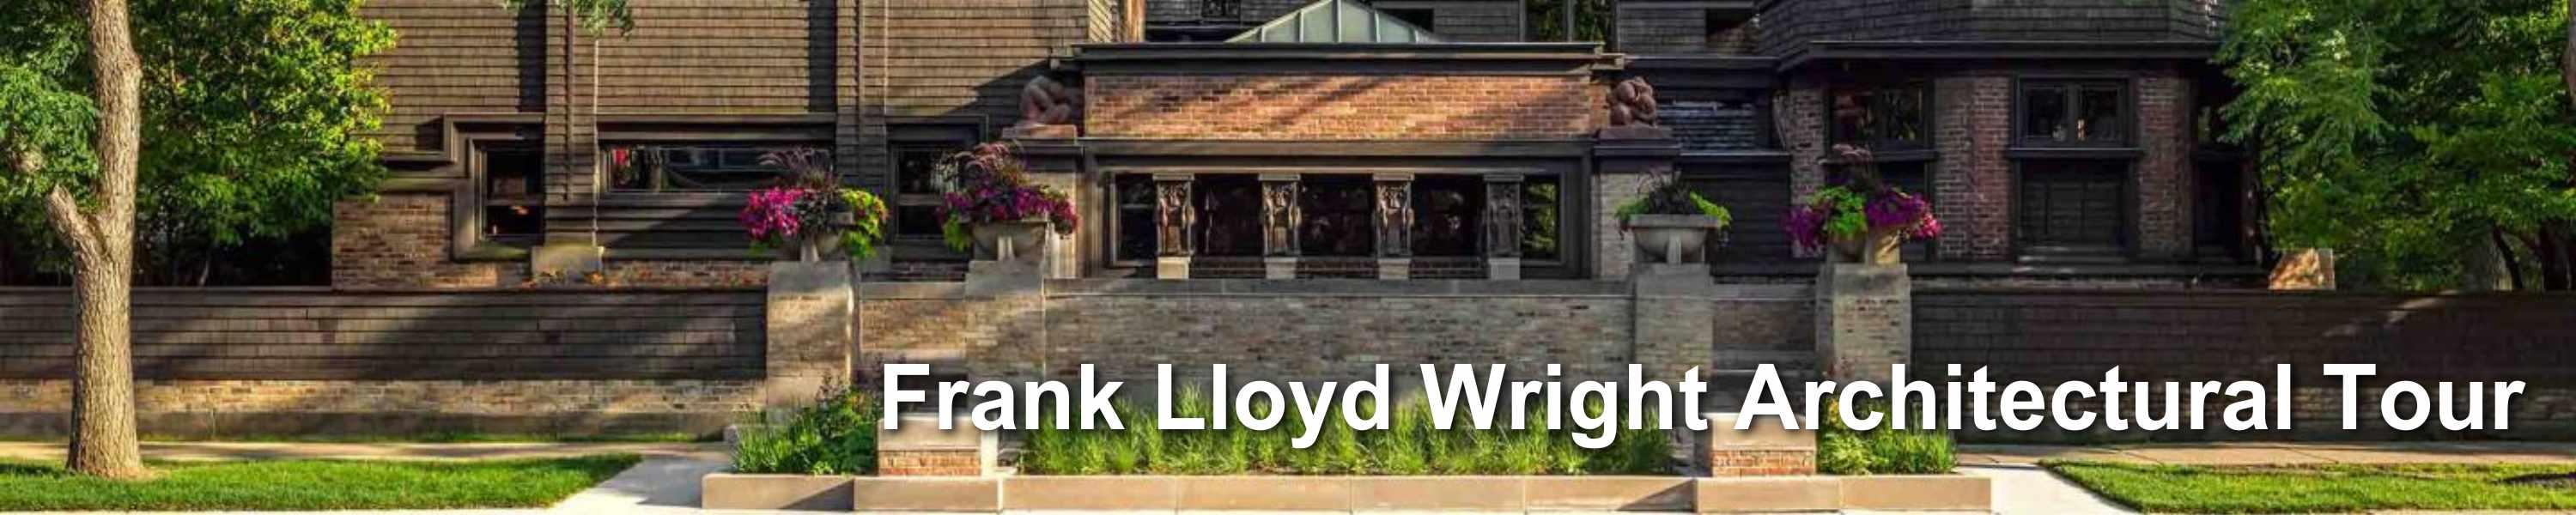 Frank Lloyd Wright Architectural Tour